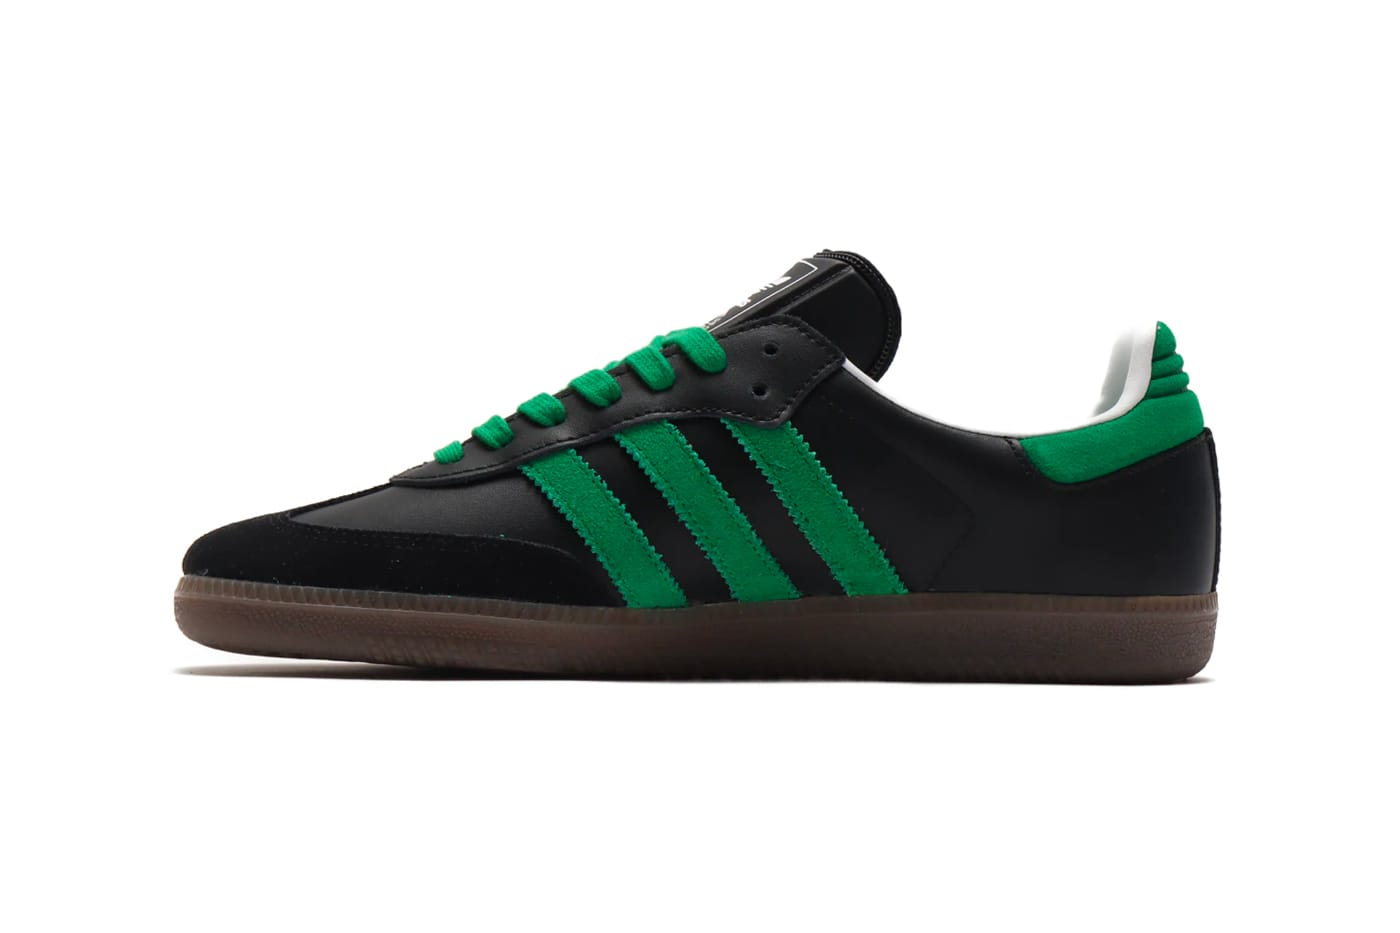 Adidas Samba OG Green Stripes available in store at Mandarin Gallery and  retailing for S$179.00 Sizes available from UK3.5 to UK10.5 #sam... |  Instagram